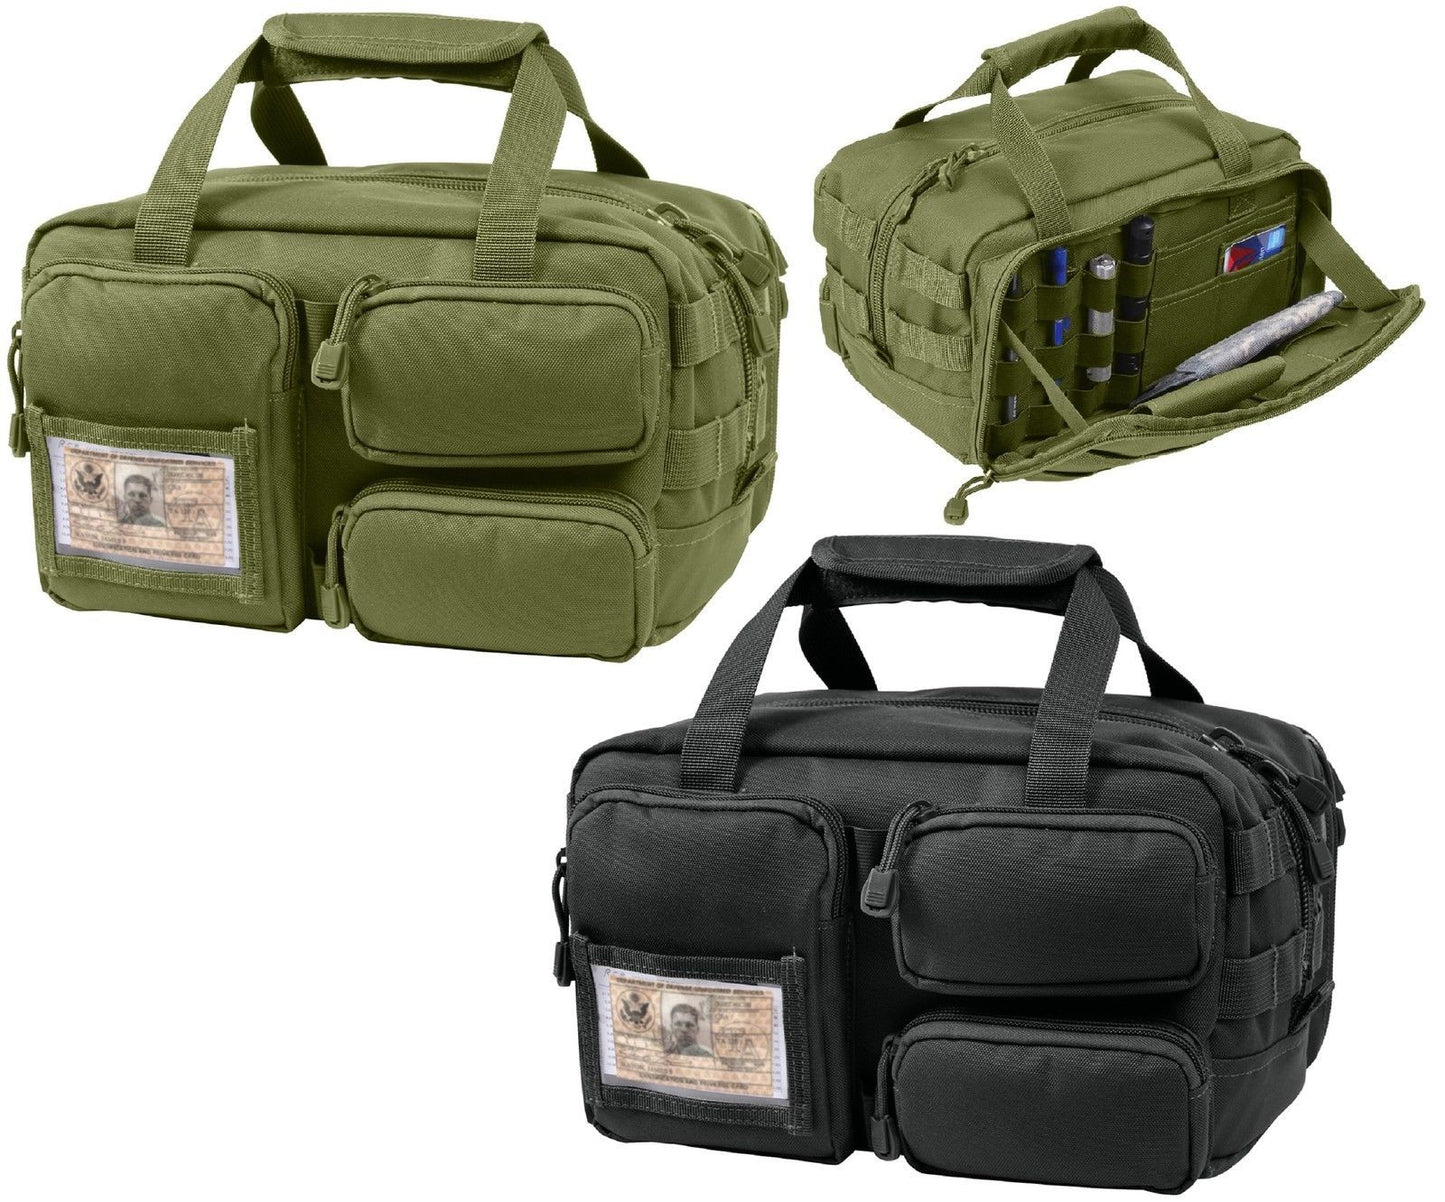 Tactical MOLLE Tool Bag - Rothco Utility ID Holder Bags w/ Removable Compartment